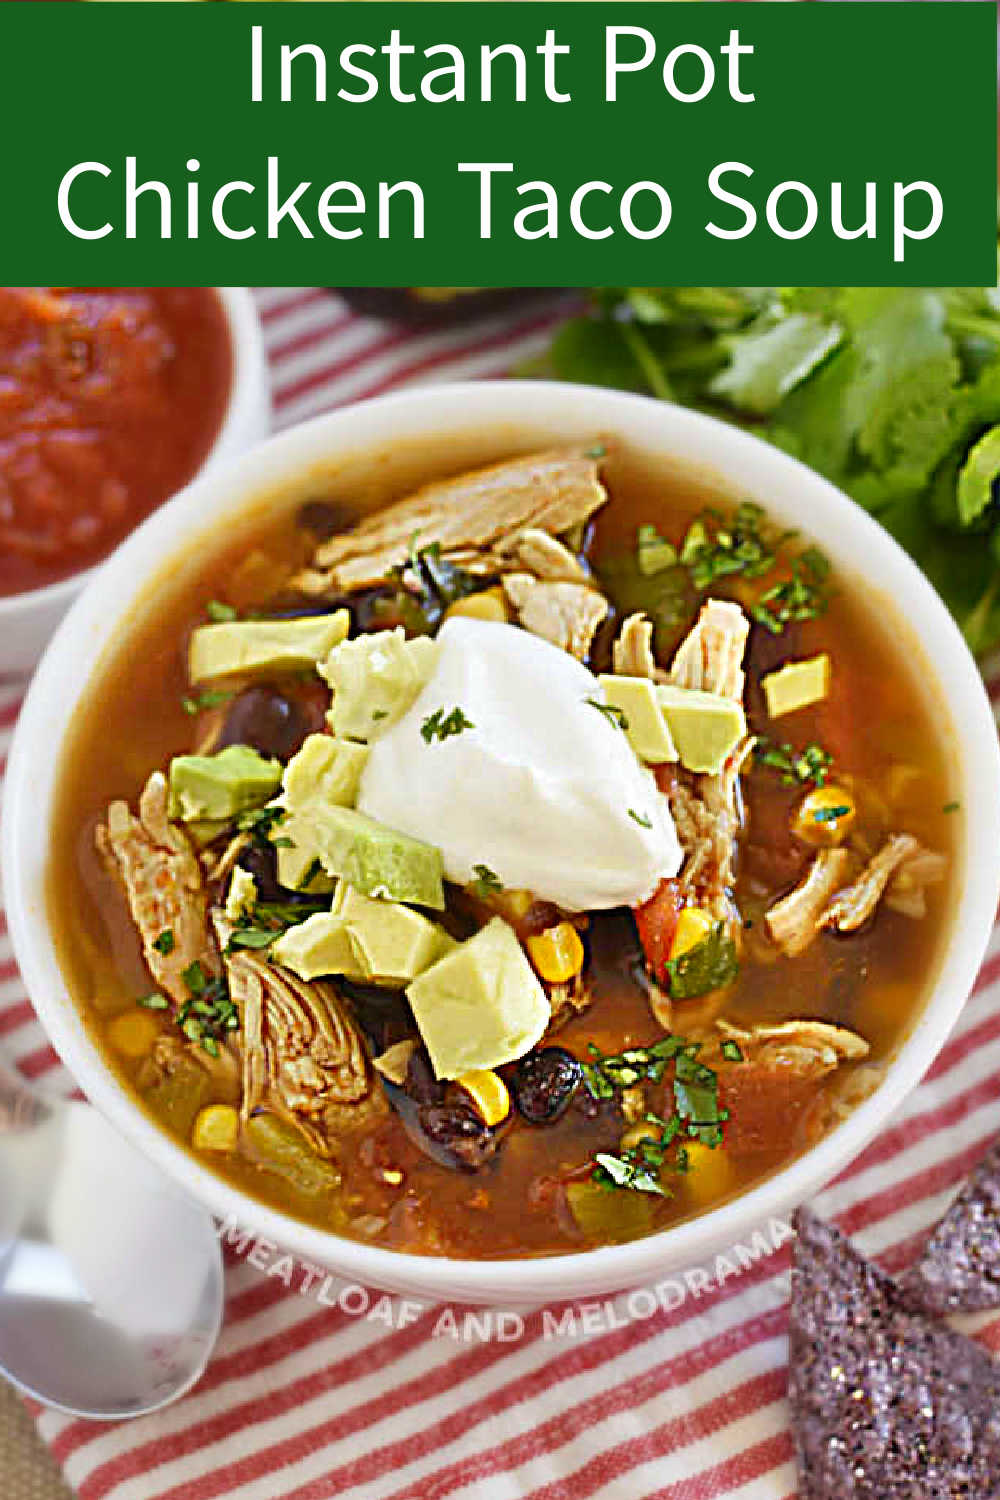 Easy Instant Pot Chicken Taco Soup recipe made with chicken breasts, diced tomatoes, black beans, corn and chiles is a delicious soup the whole family will love. Perfect for busy weeknights and a great way to warm you up on cold days! via @meamel